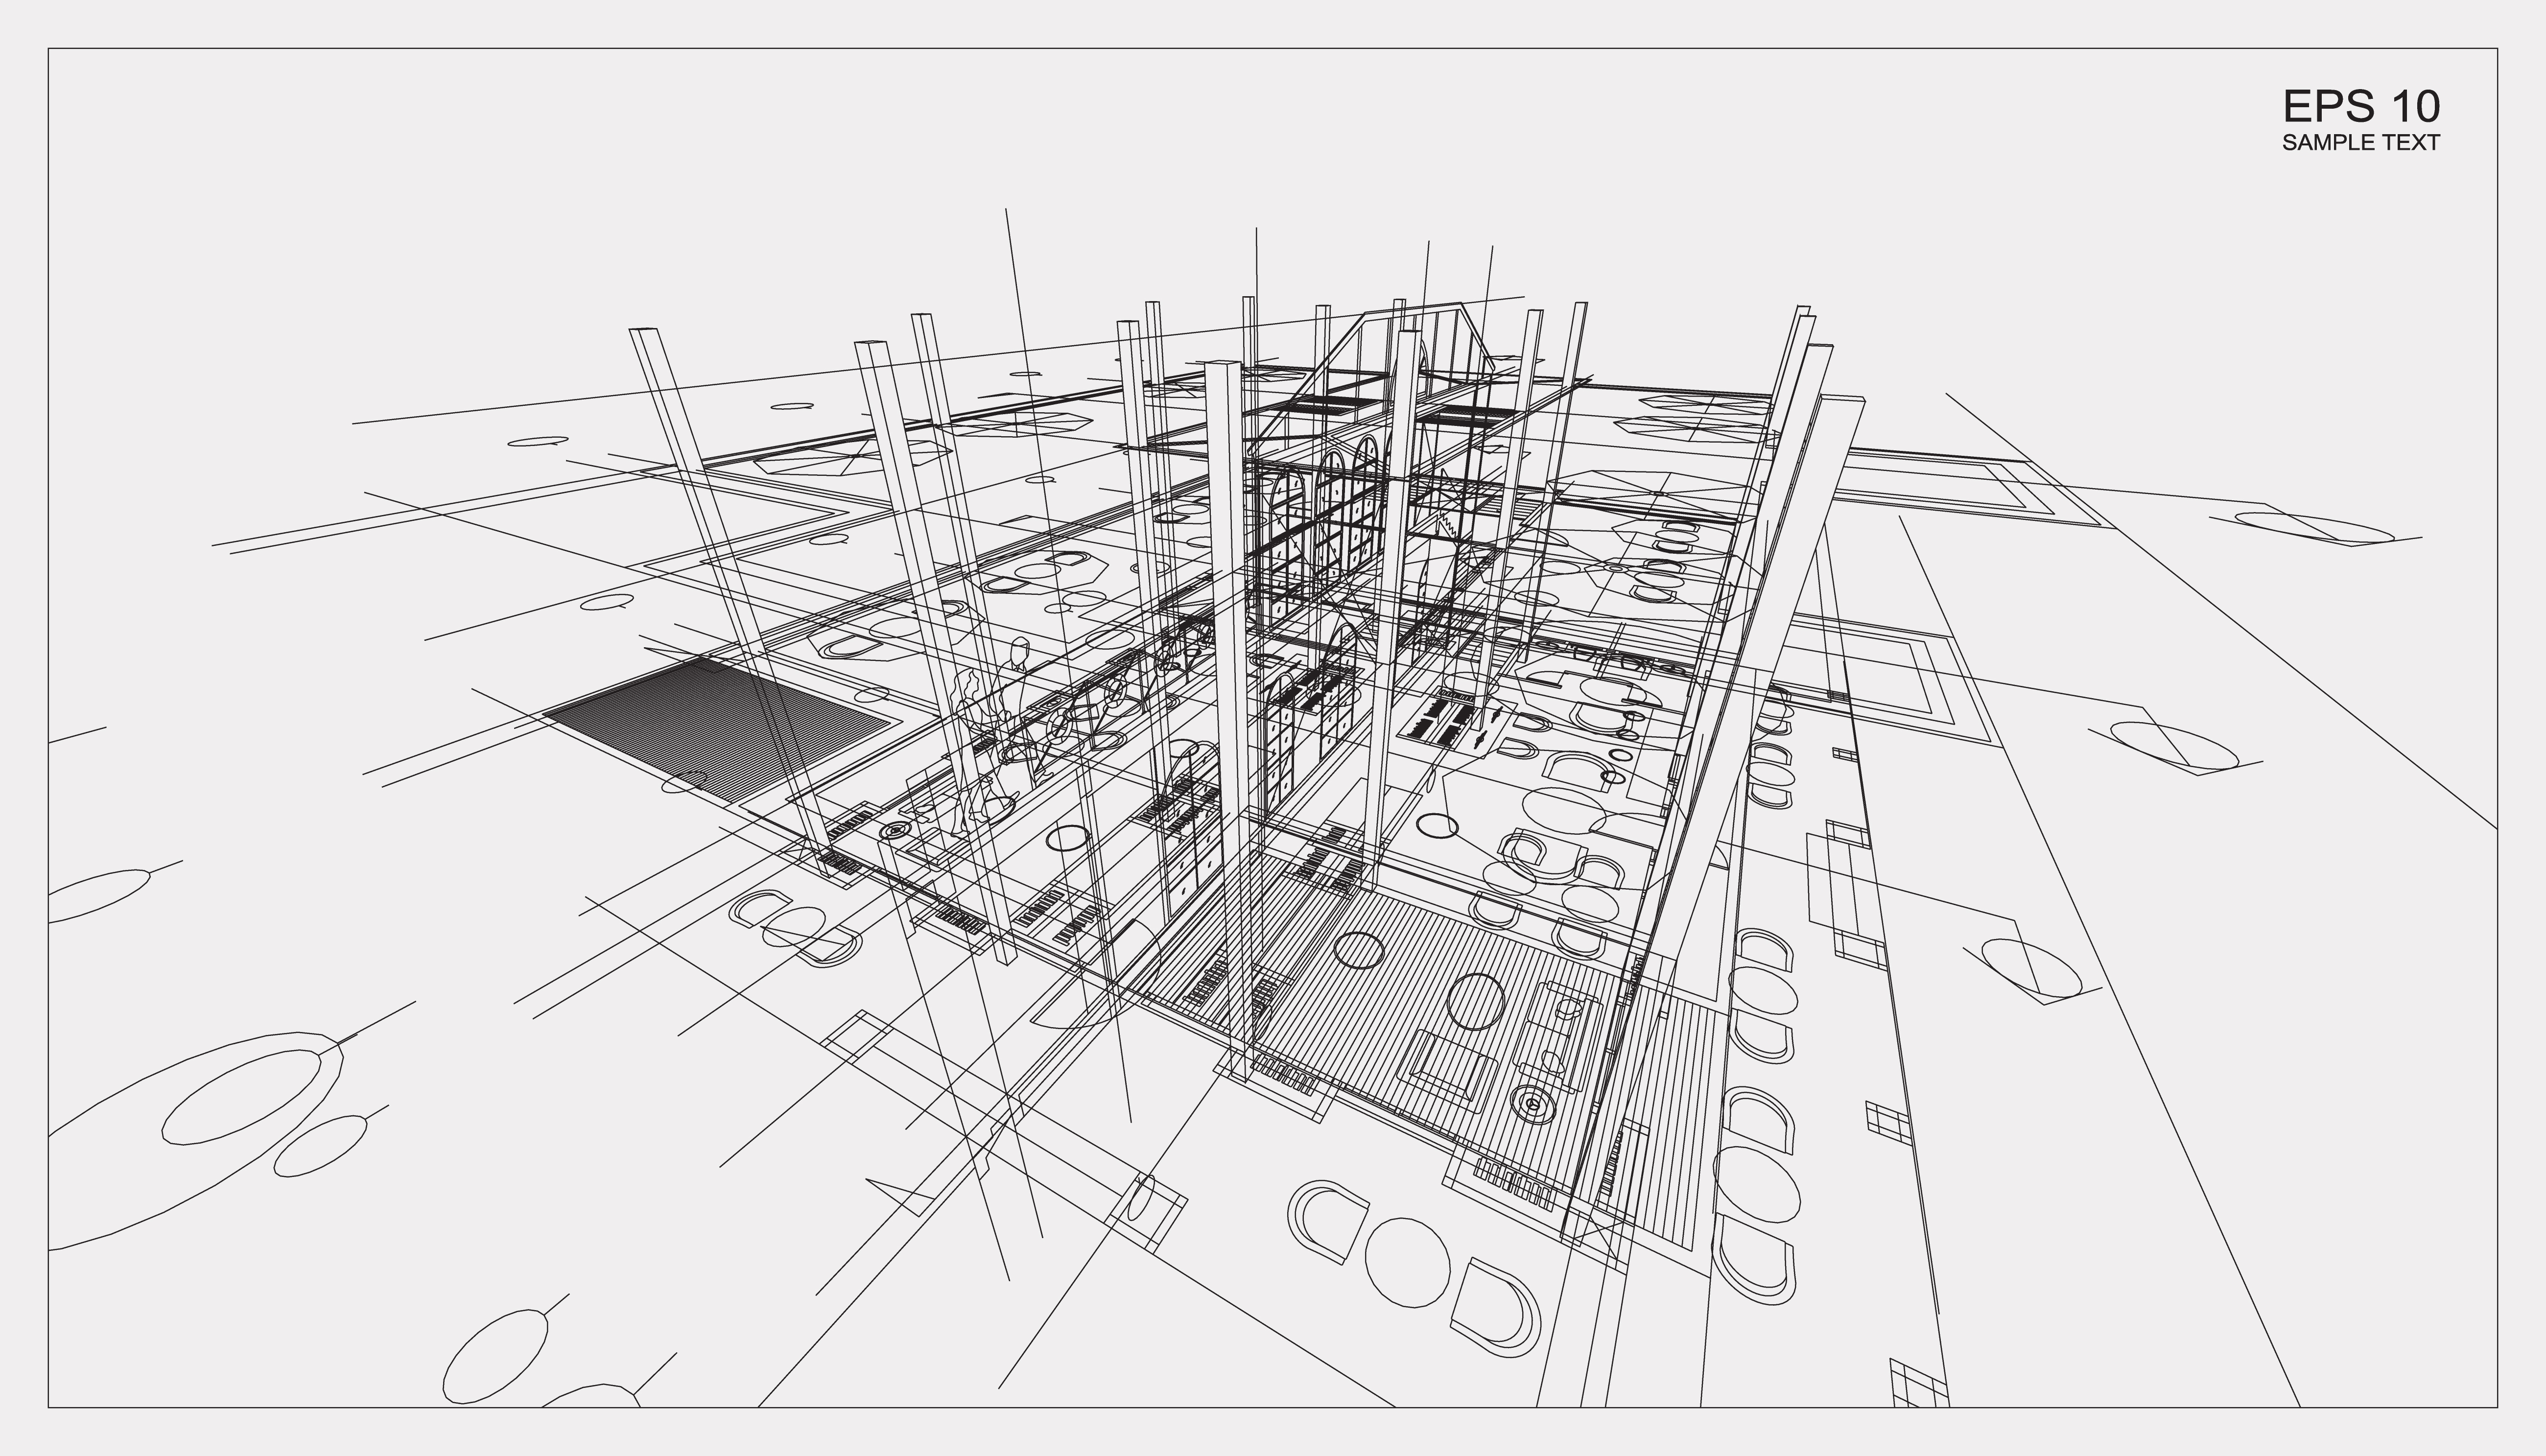 How to read structural steel fabrication drawings